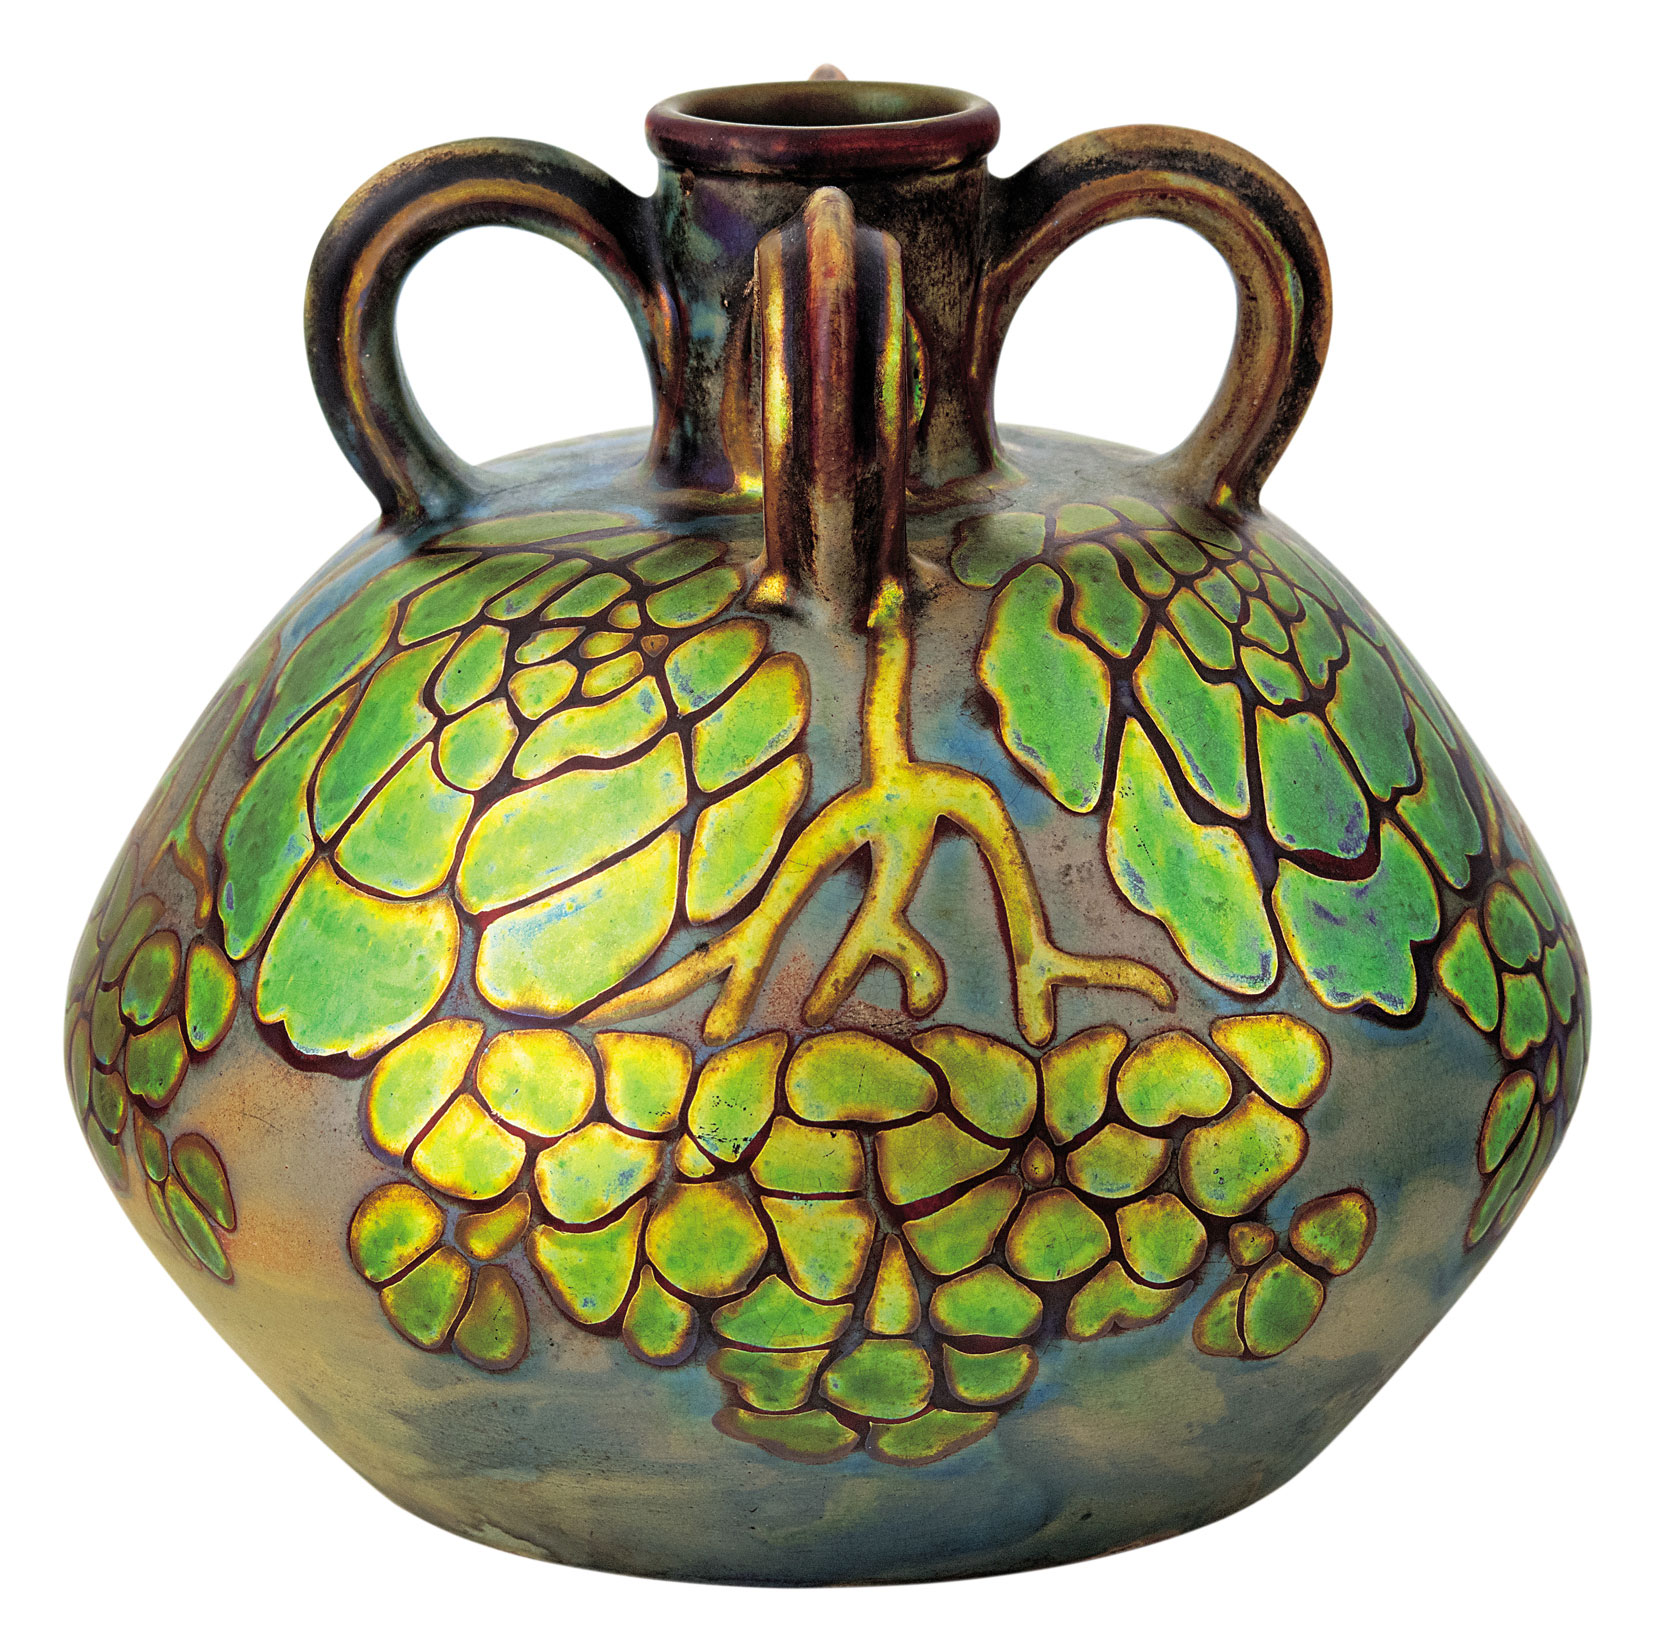 Zsolnay Vase with four Handles and Stylized Flowers, 1901, PLAN BY APÁTI ABT, SÁNDOR